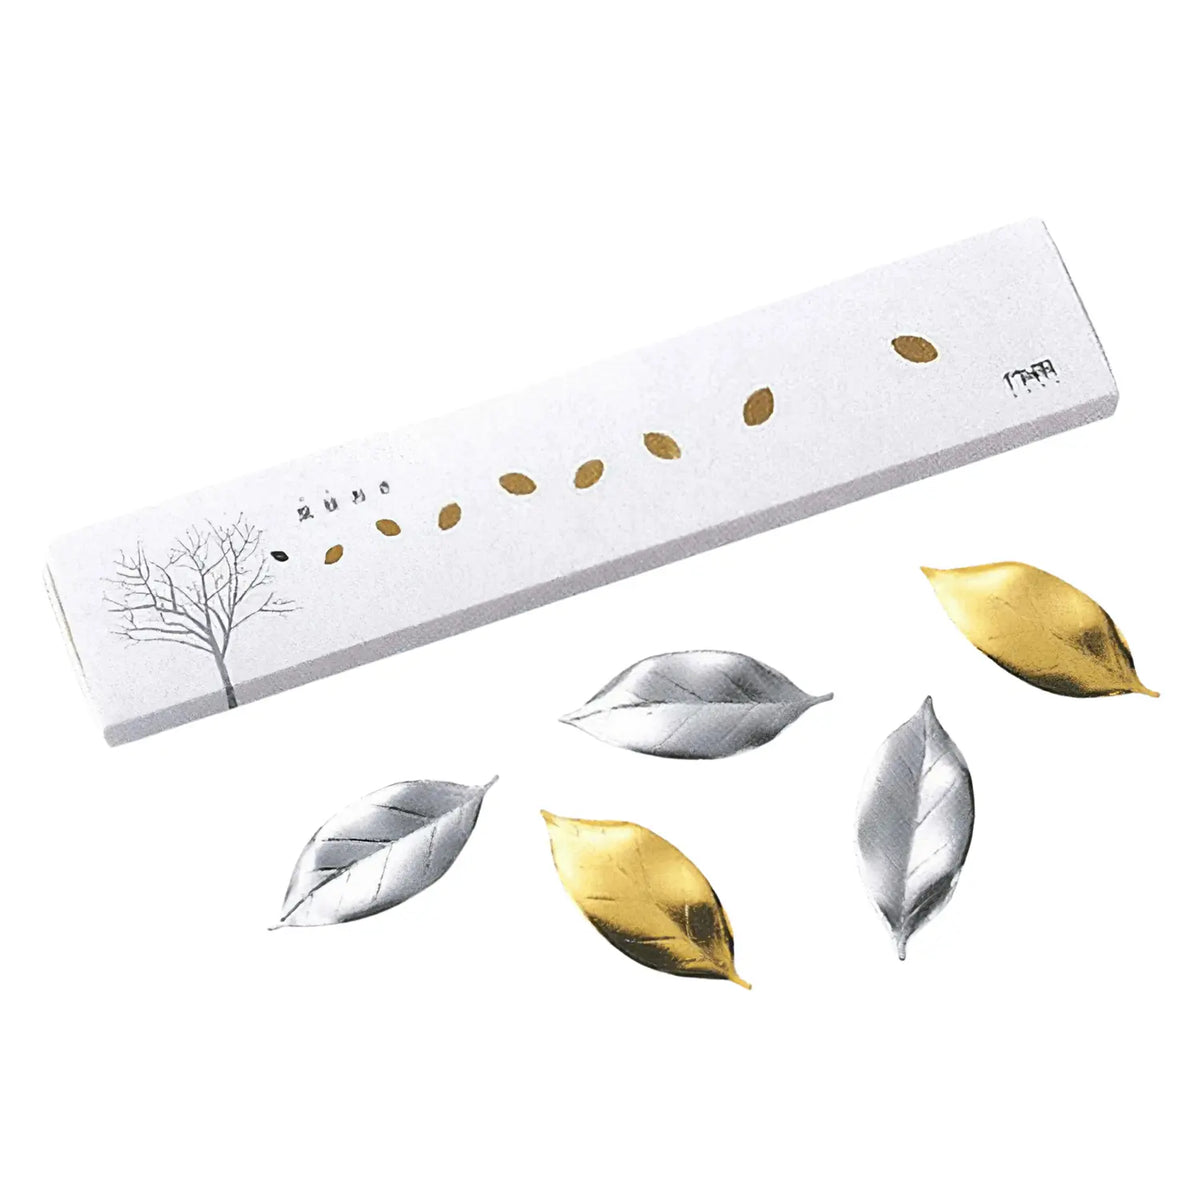 Tsubame Shinko HUTLERY Stainless Steel Leaf-Shaped Chopstick Rests (Set of 5) (Gift-Boxed)